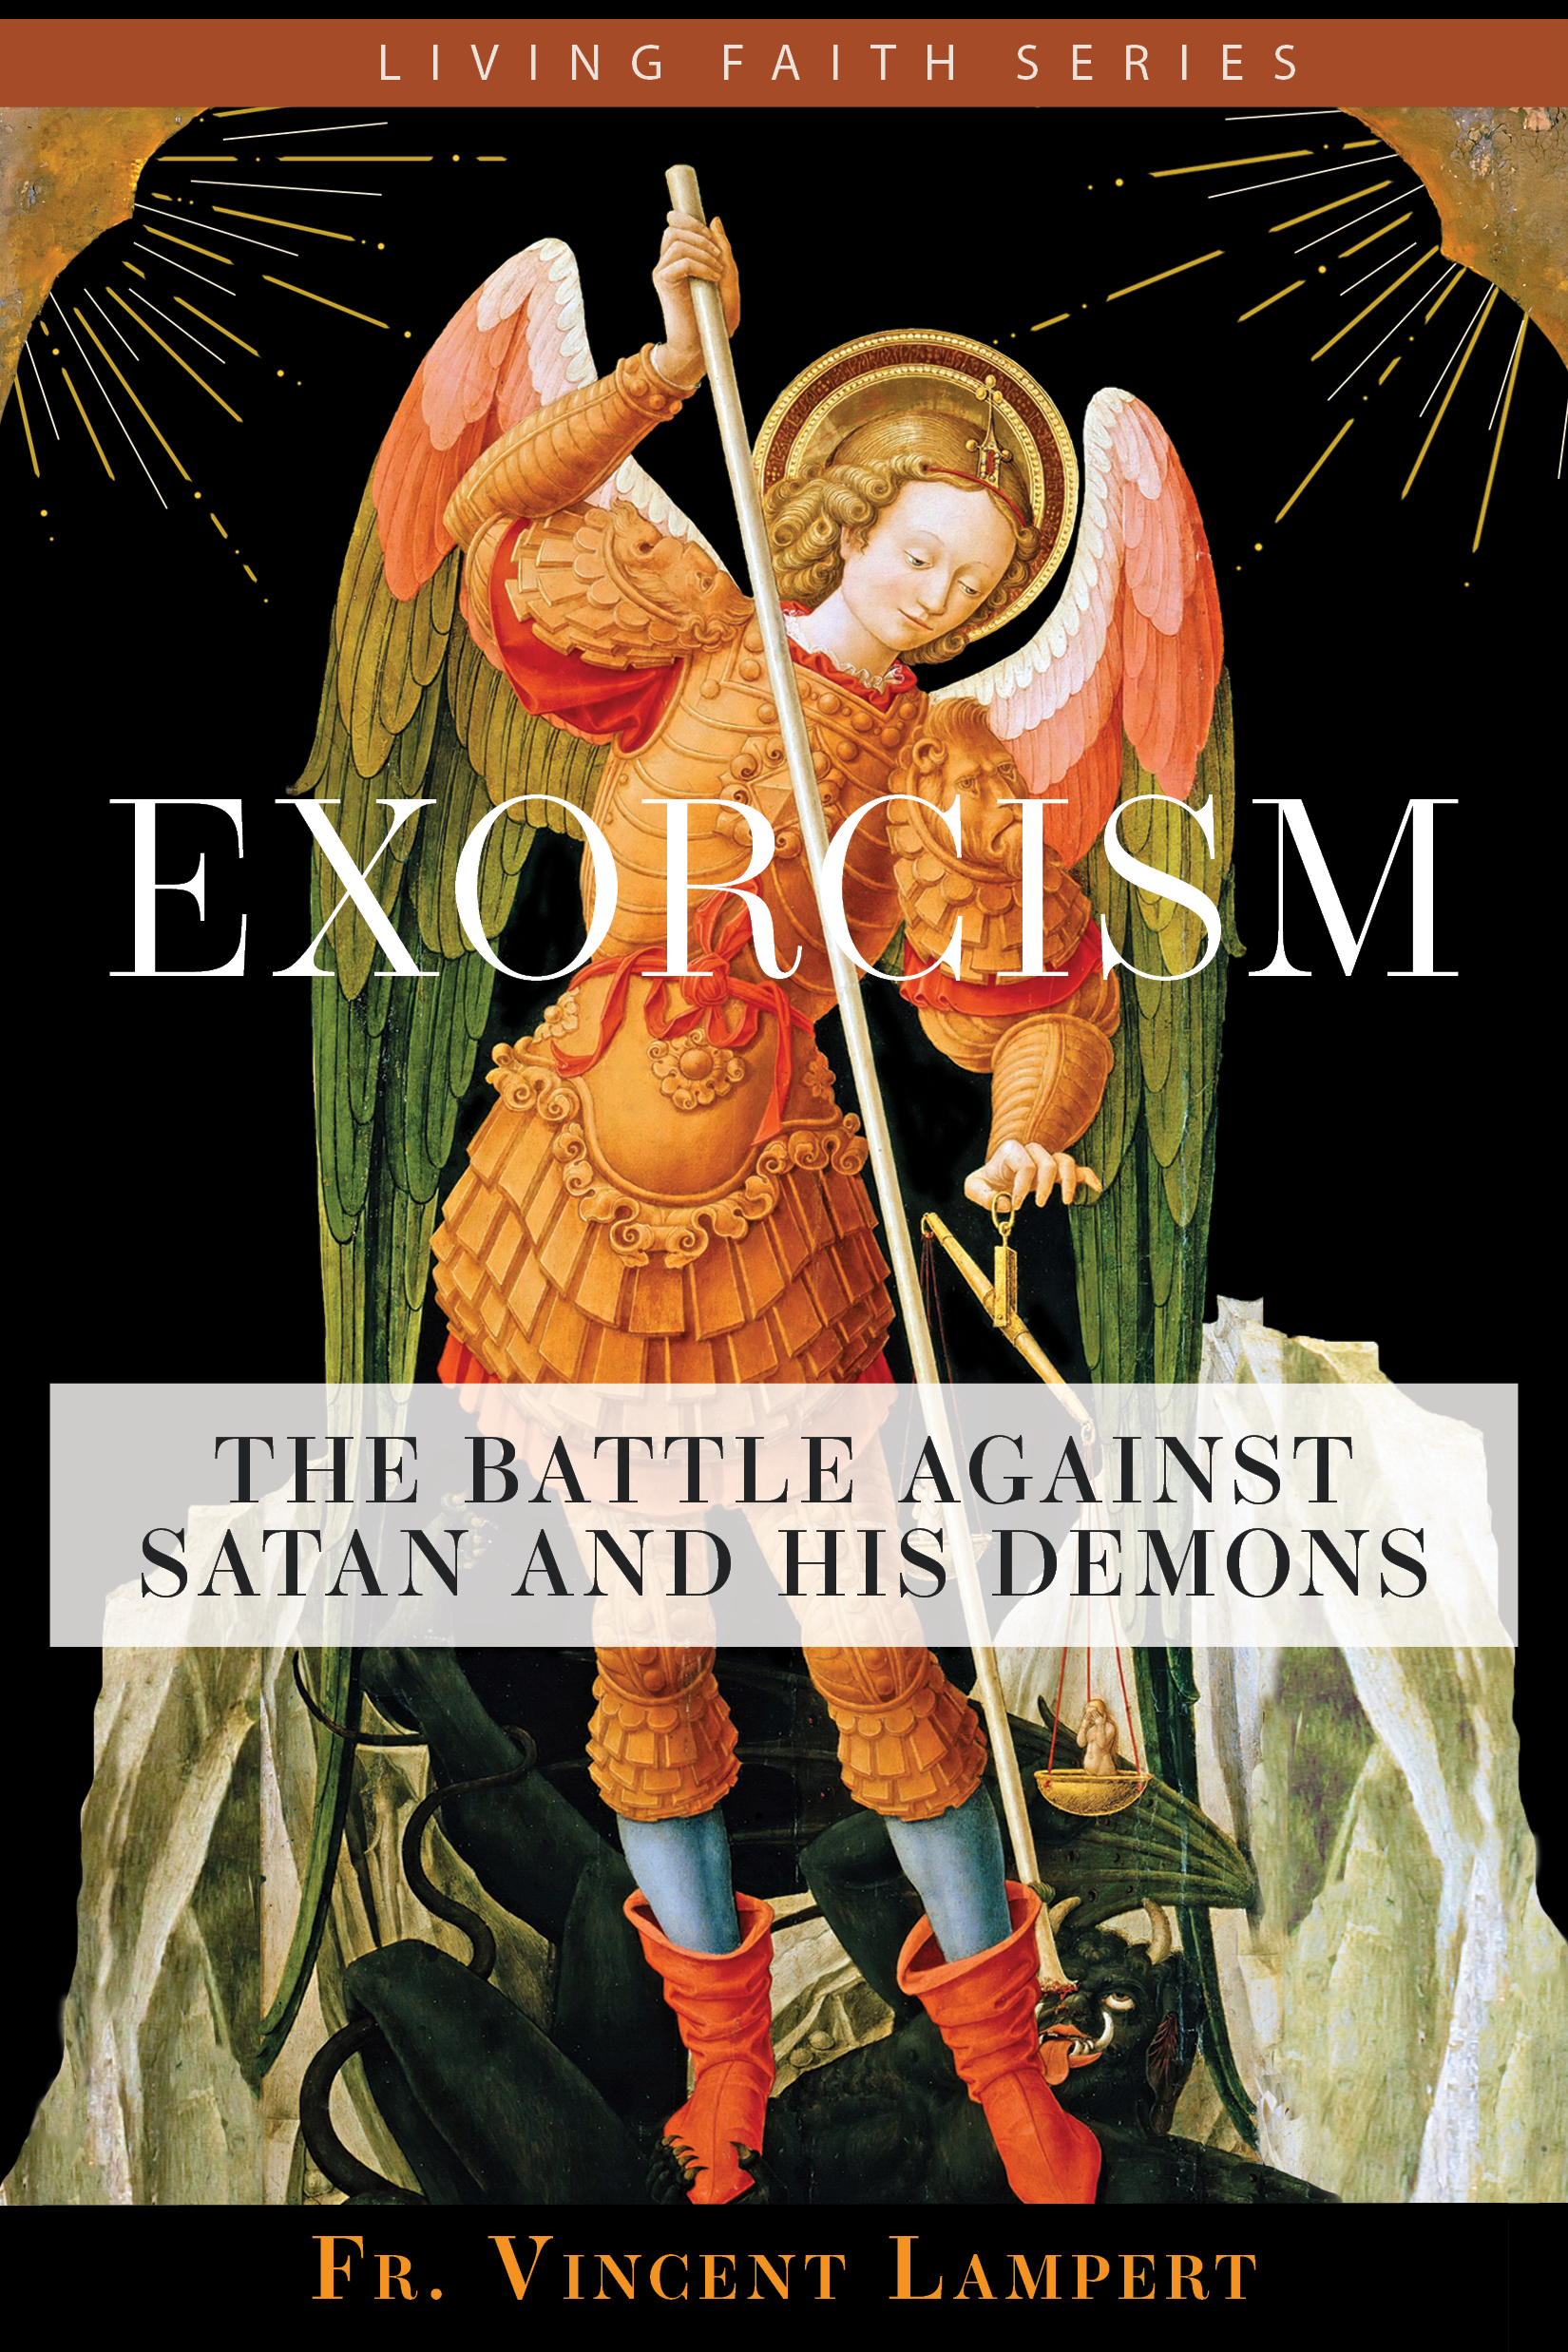 The battle Is real: A guide for spiritual warfare – Catholic World Report